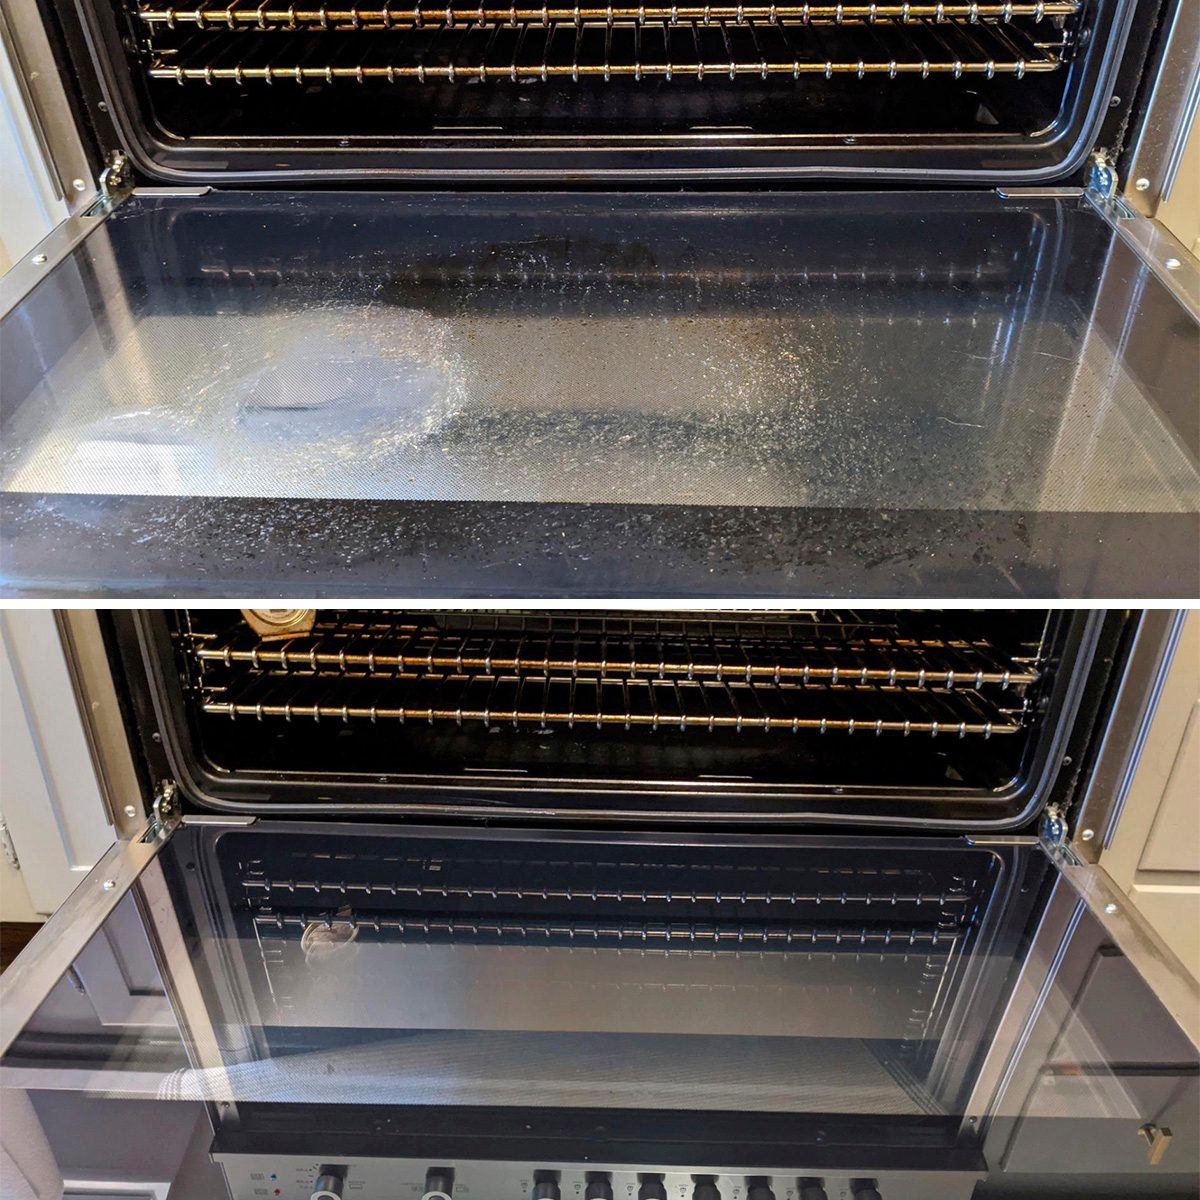 Using the Pink Stuff to Clean Oven: Part II 